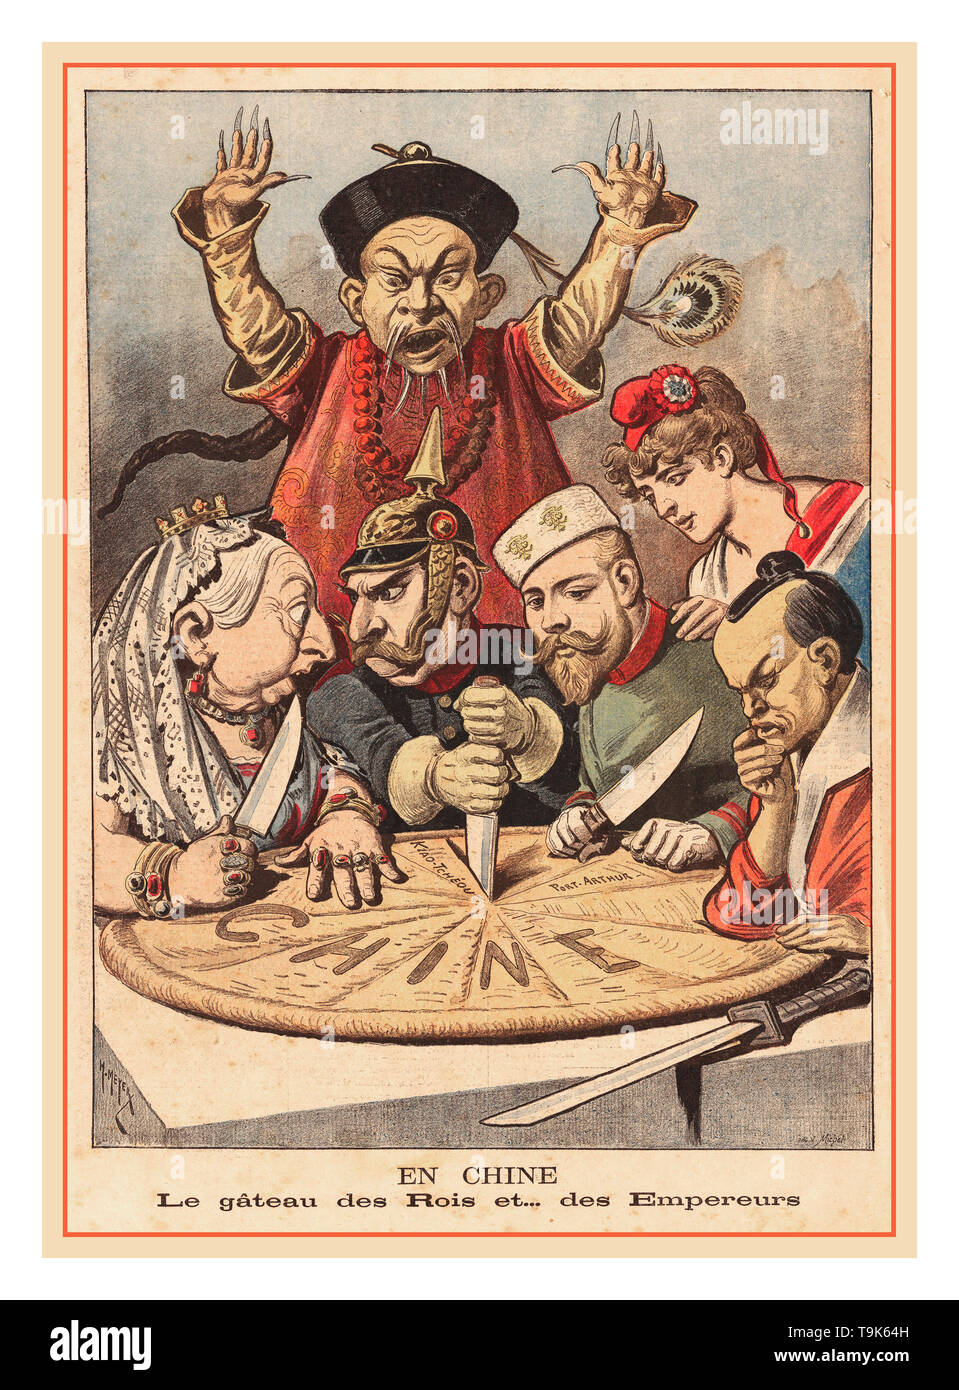 Vintage political illustration carving 'The Cake of China' 1900's The great powers of Europe, brandishing knives, competing to carve up China: Queen Victoria, Kaiser Wilhelm II, and Czar Nicolas II. Marianne of France looks on, supporting her Russian ally. Japan contemplates what move to make, while a caricature of China is dismayed but powerless Stock Photo